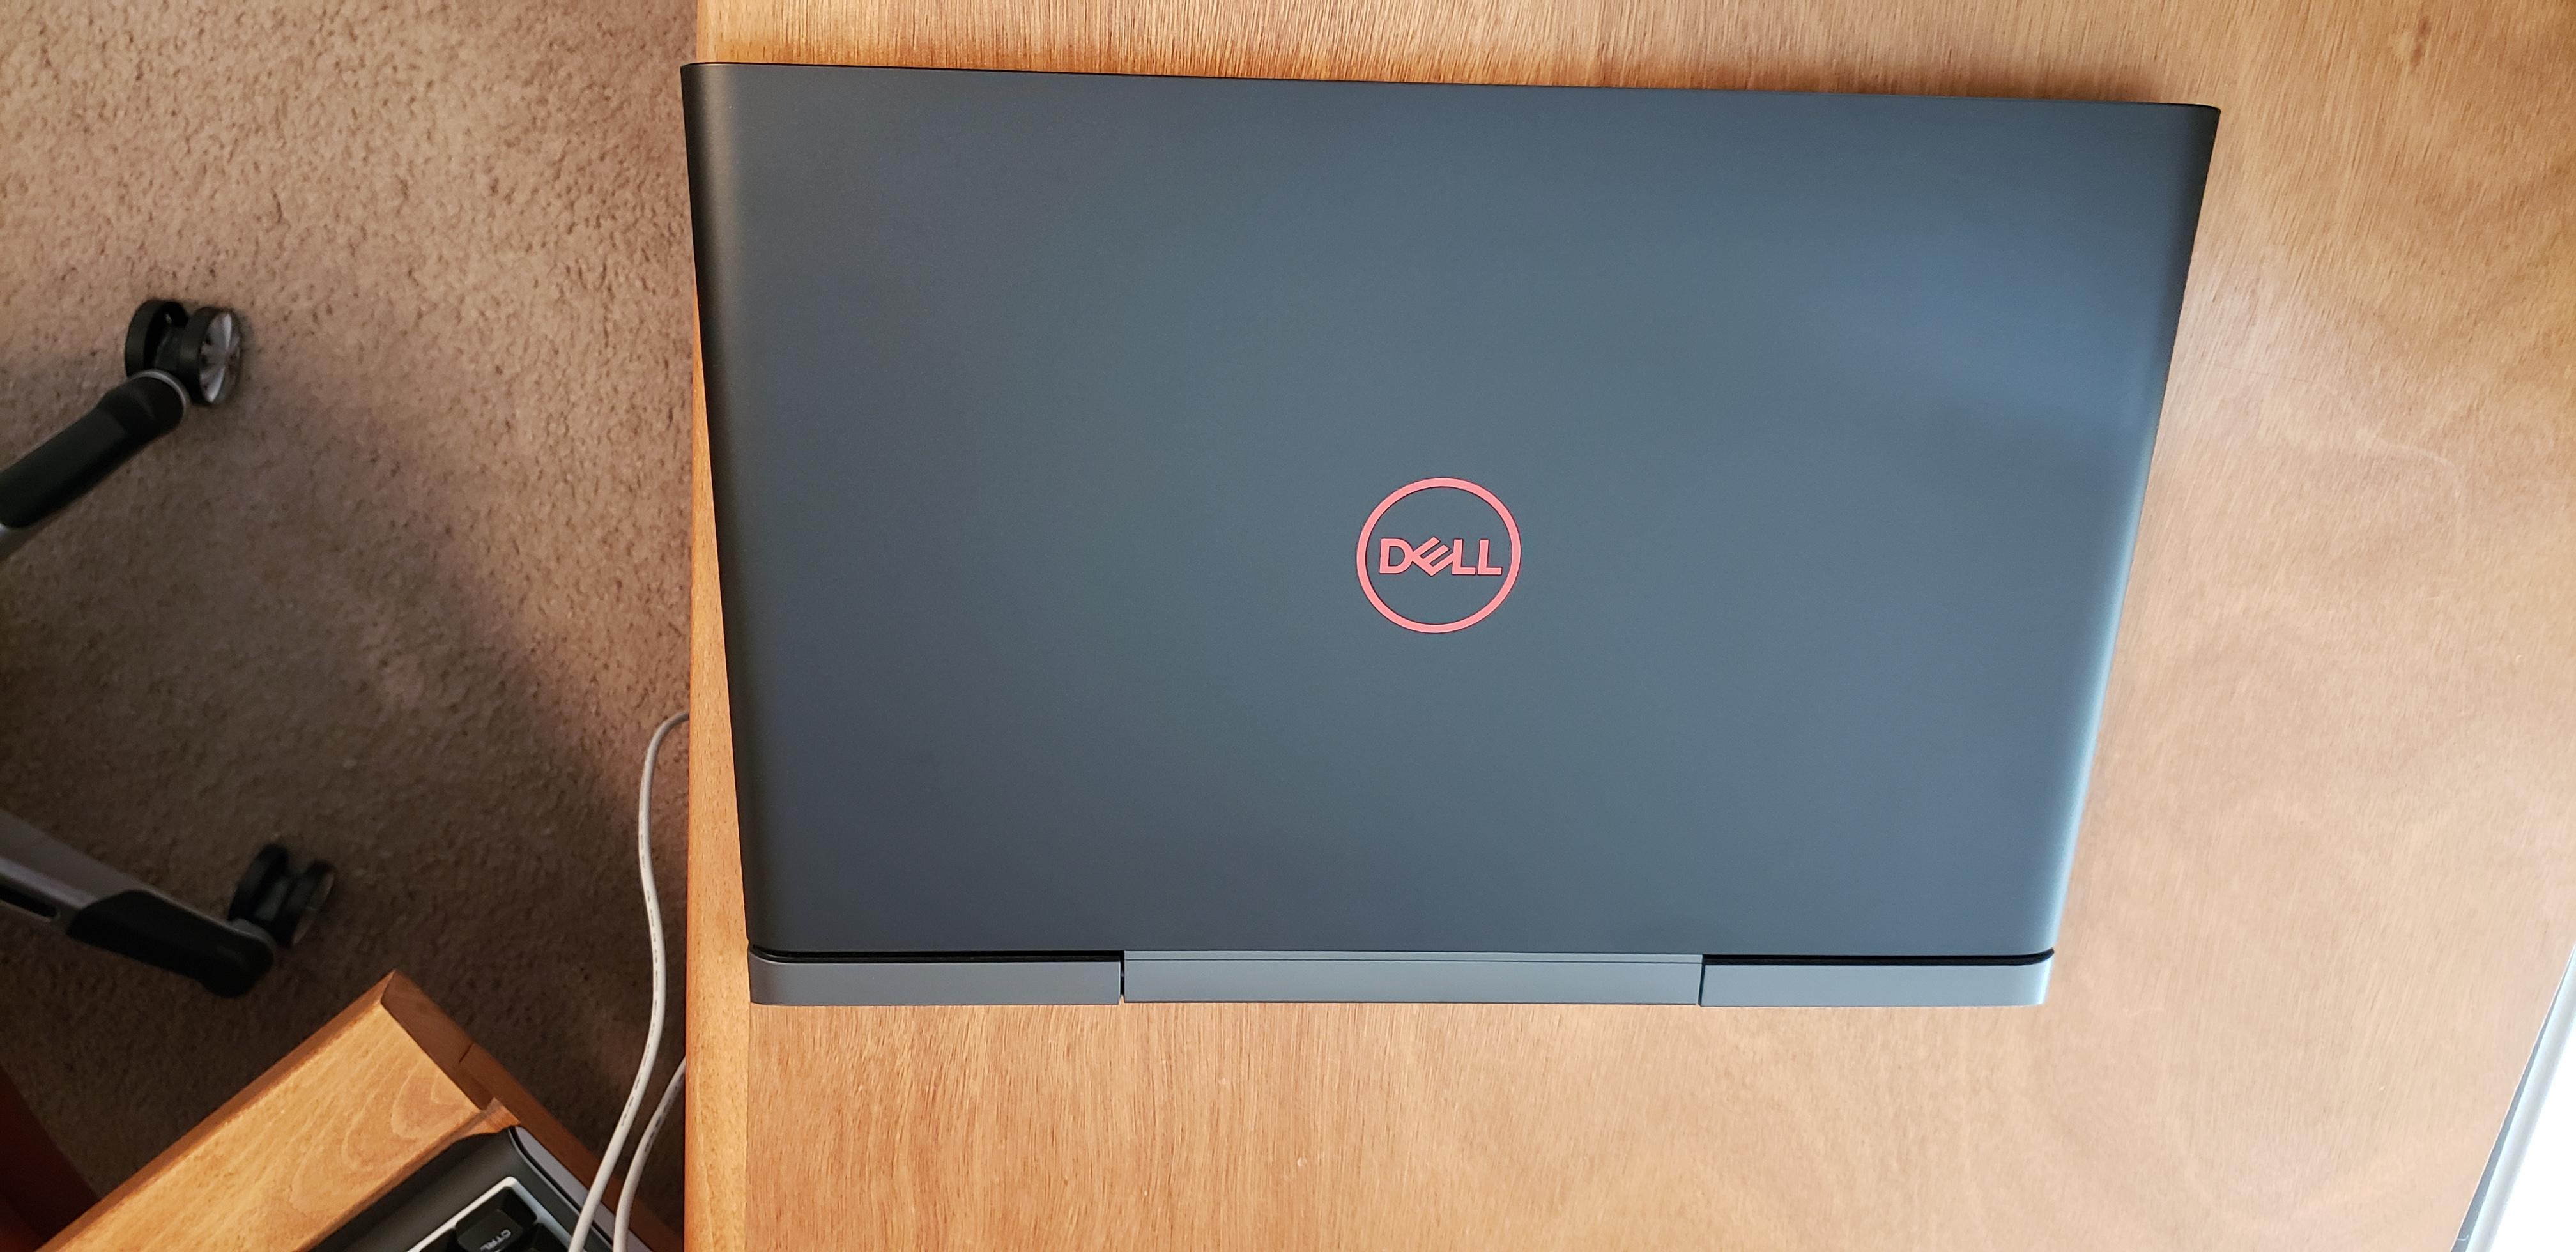 FS Dell Inspiron 15 7000 Gaming Laptop For Sale